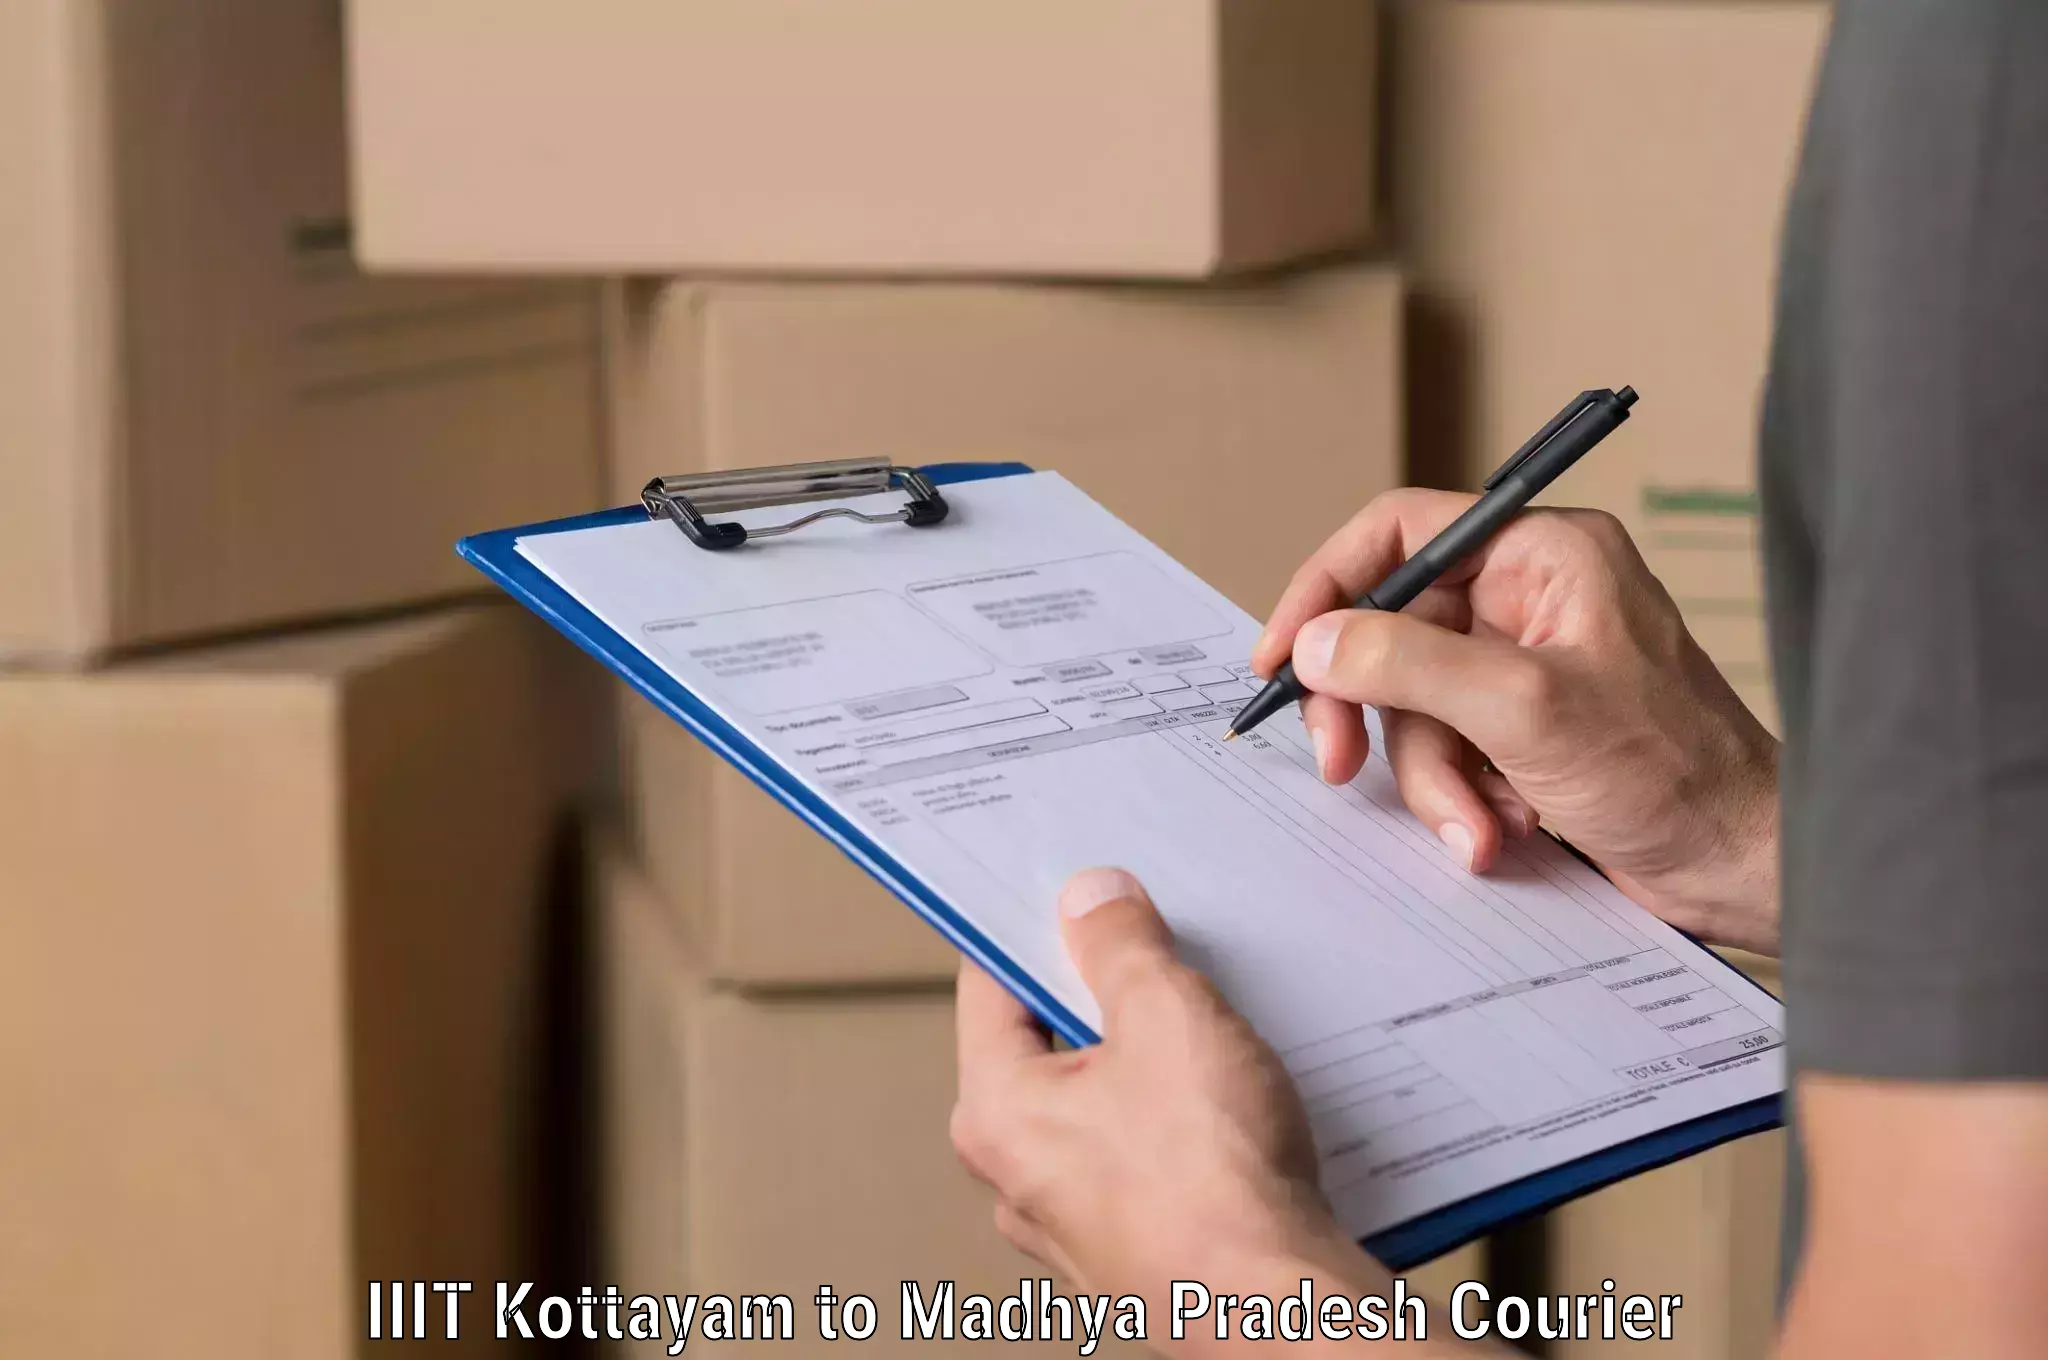 Optimized shipping services IIIT Kottayam to Gwalior